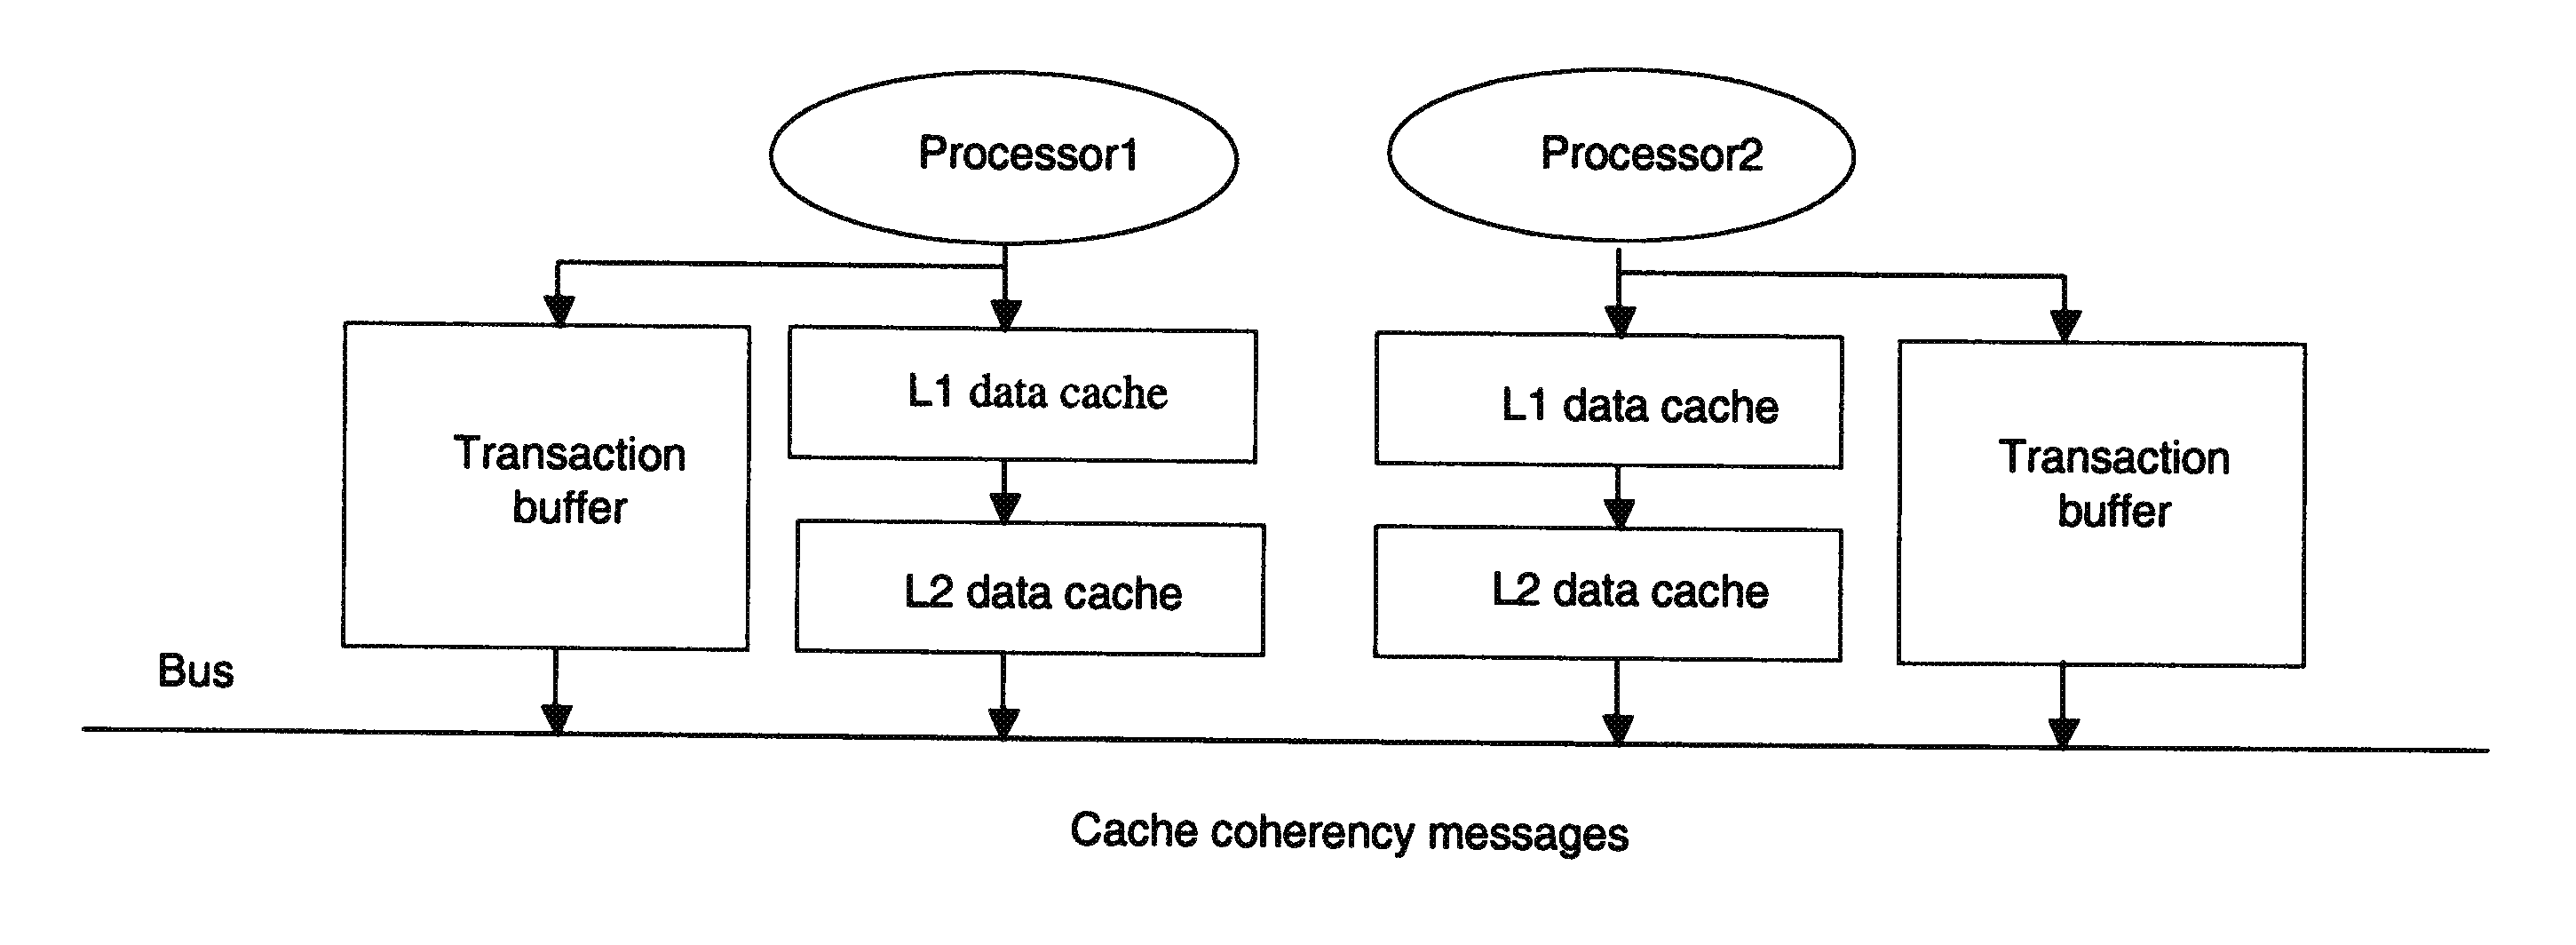 Method and System for Handling Transaction Buffer Overflow In A Multiprocessor System